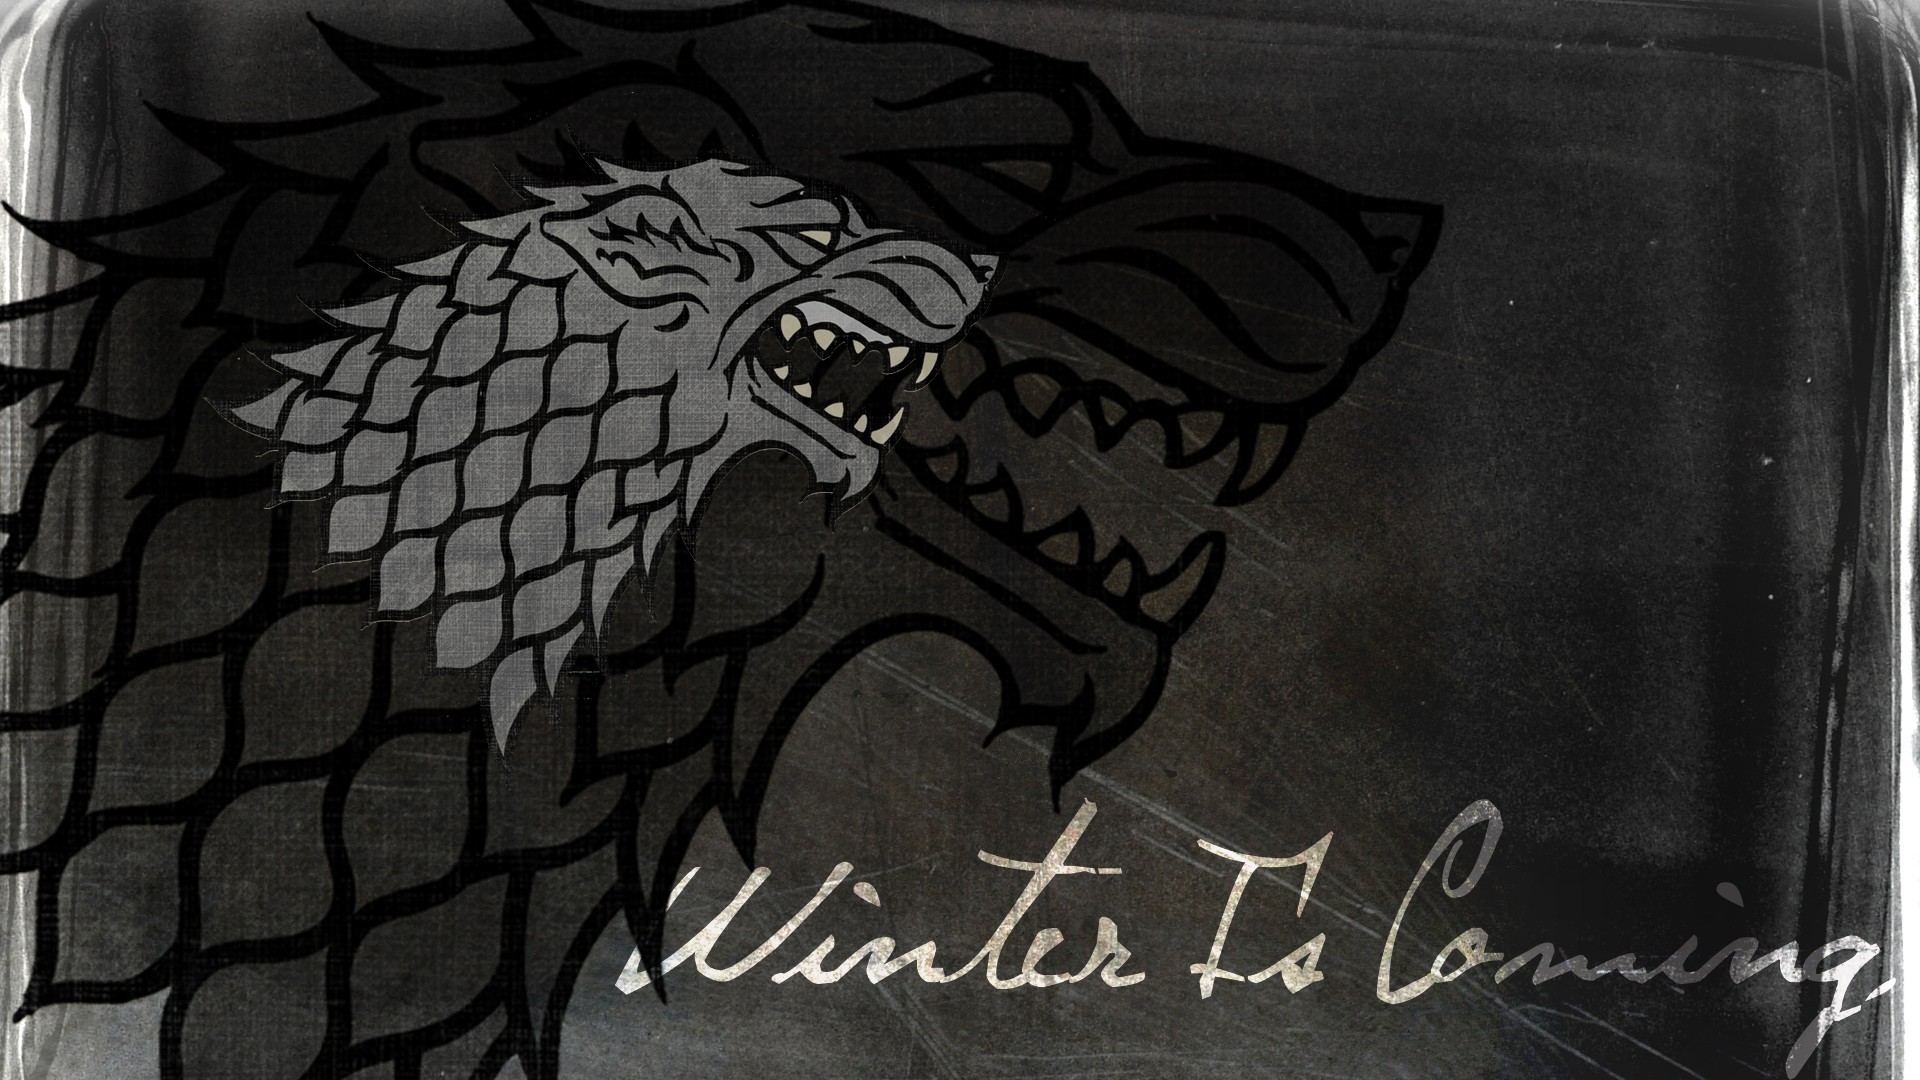 Game Of Thrones Game Of Thrones Winter Is Coming House Stark Winter Is Coming House Stark 1920x1080